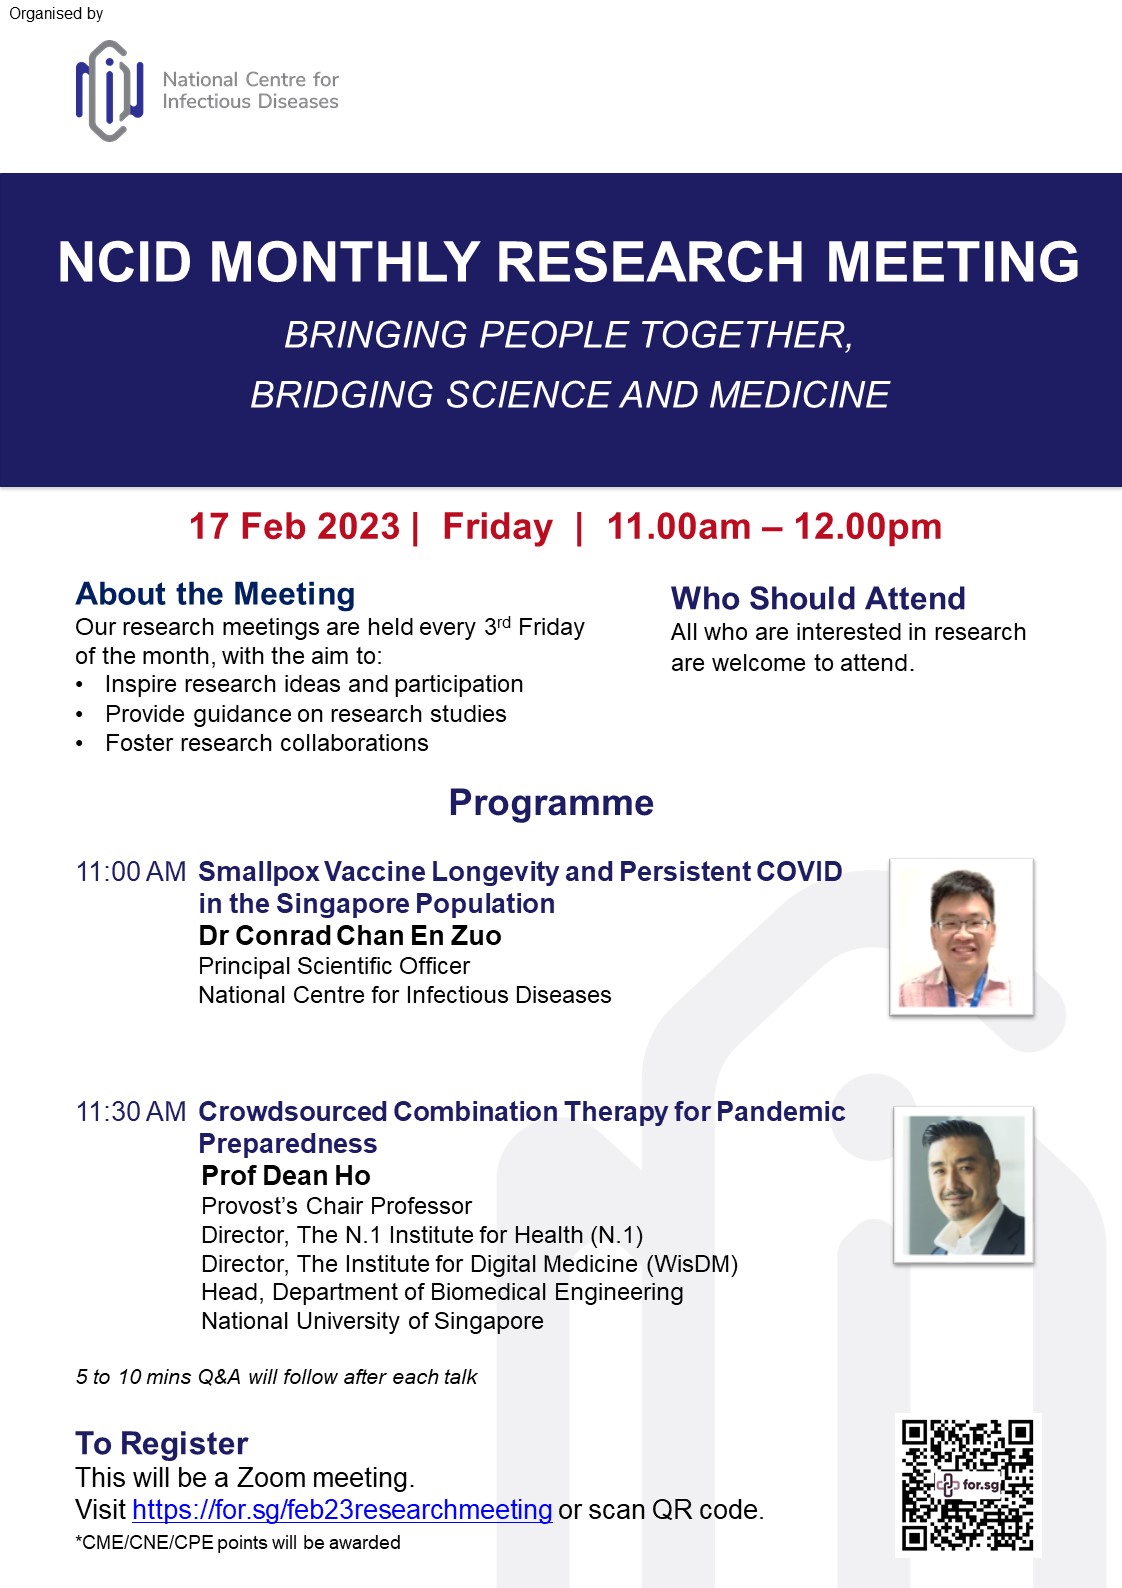 NCID Research Meeting Publicity Poster_Feb 2023 (1).JPG